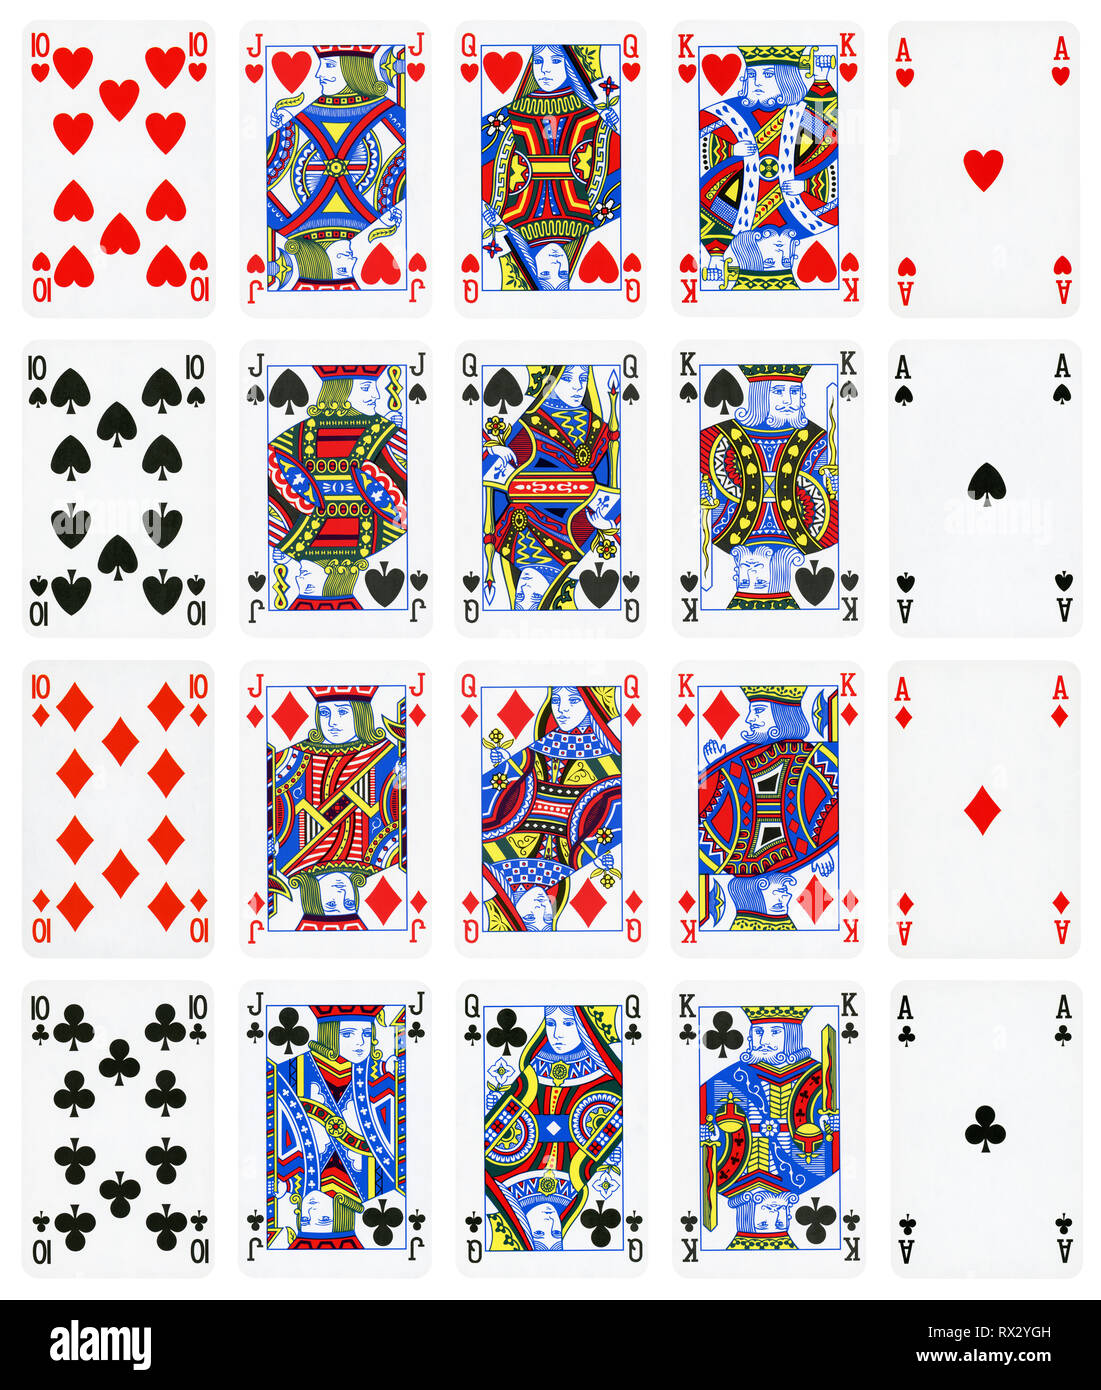 Jack queen and king stylized playing cards Vector Image